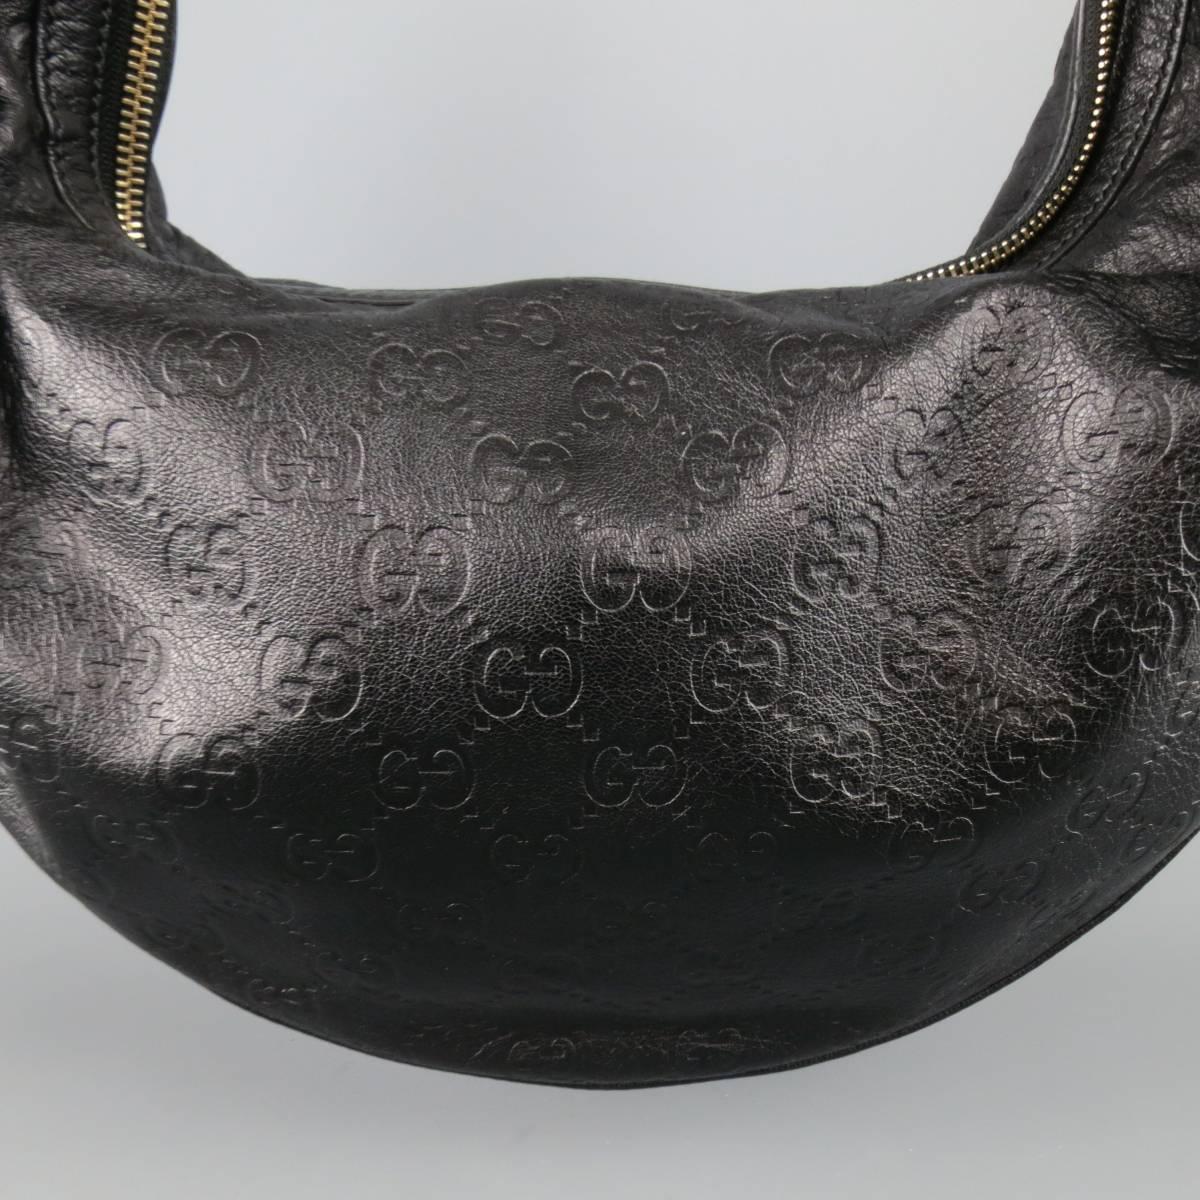 GUCCI hobo bag comes in smooth black Guccisima monogram embossed leather and features a half moon shape, top zip closure, leather handle with oversized light gold tone bamboo hoops, and printed canvas liner. Made in Italy.
 
Excellent Pre-Owned